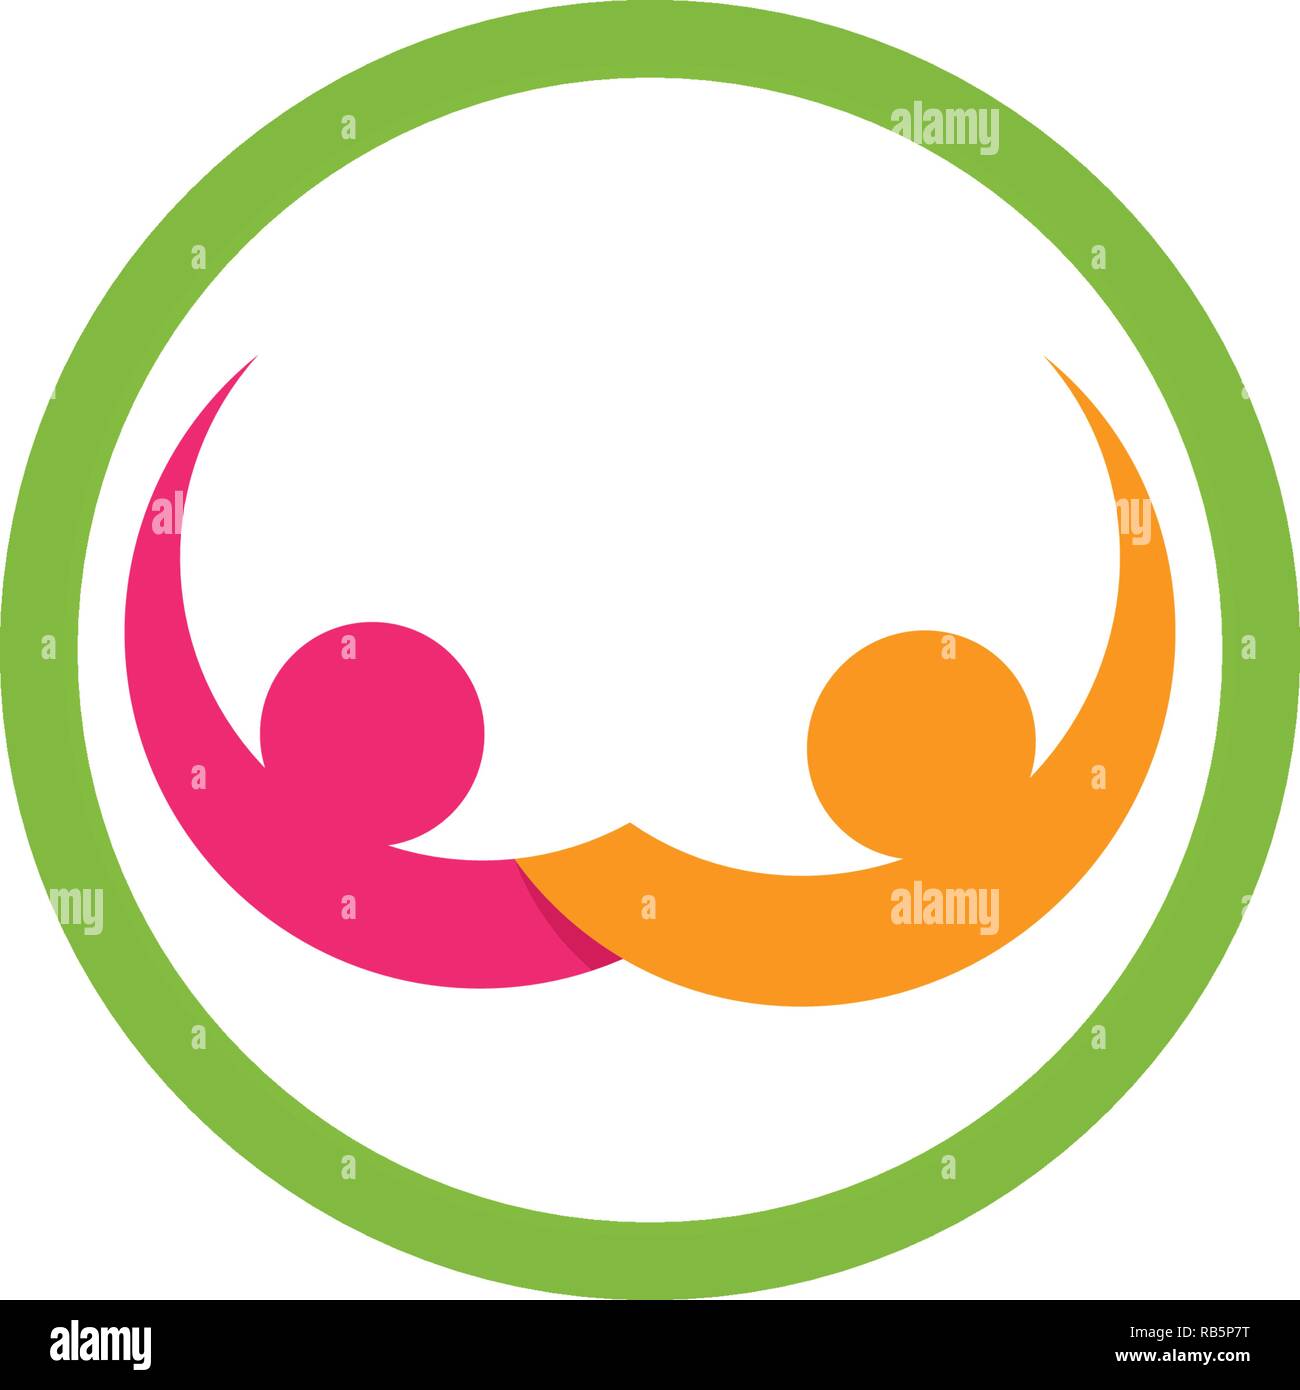 Adoption and community care Logo template vector icons Stock Vector